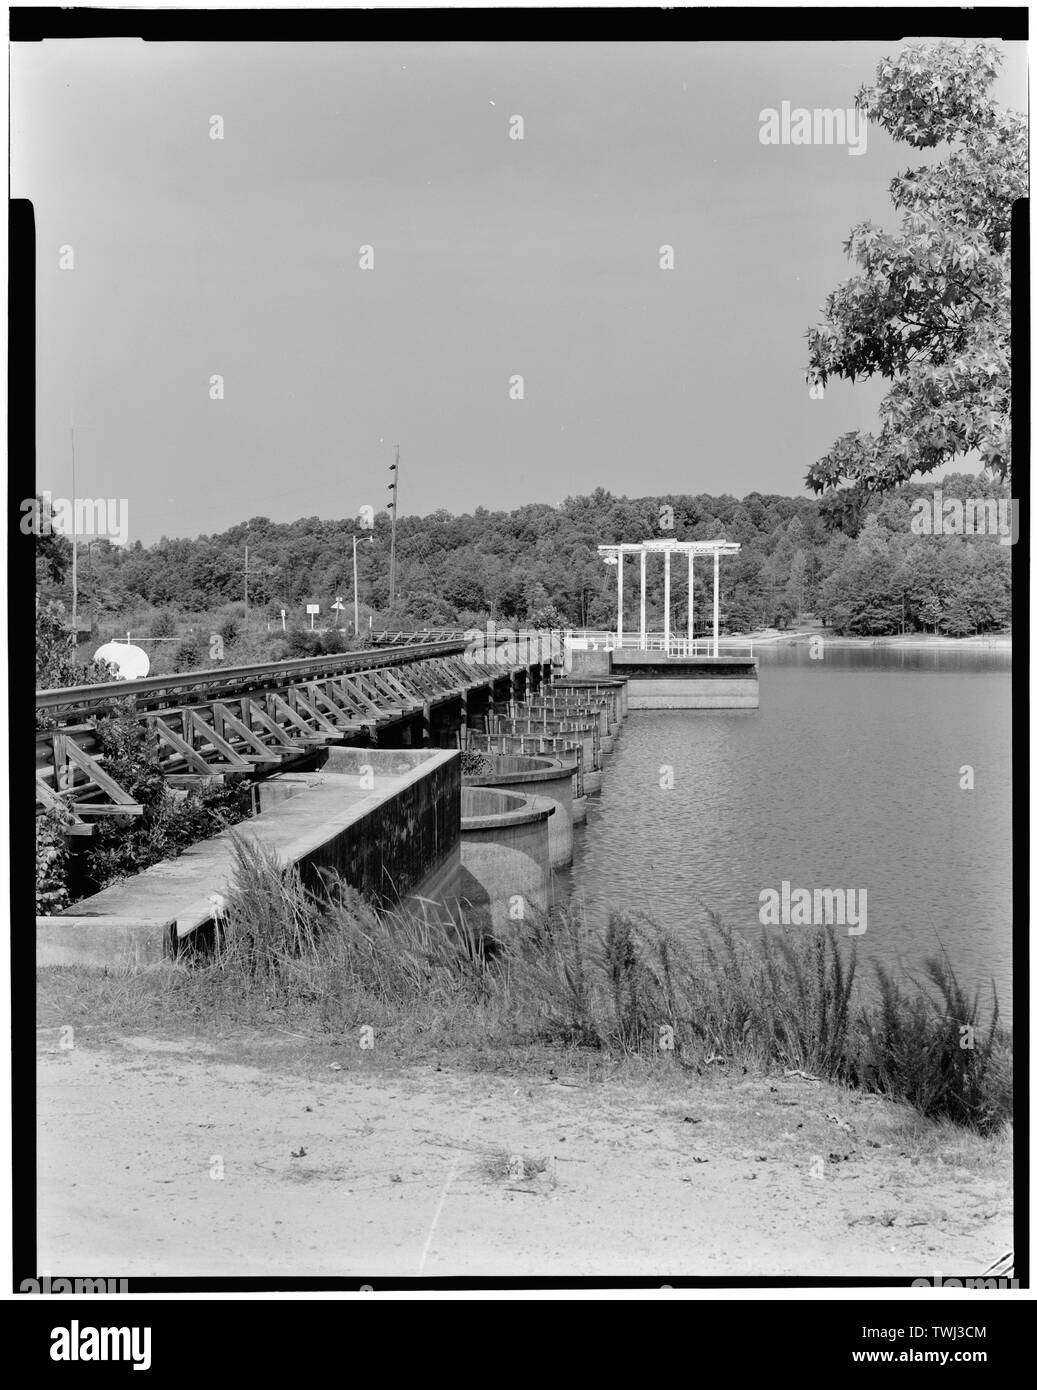 Secession Lake dam- general view towards west showing intake gates - Abbeville Hydroelectric Power Plant, State Highway 284 and County Road 72, Rocky River (historical), Abbeville County, SC; Abbeville Water and Electric Plant Company; Pennell, James Roy; White, W H; Abbeville Power Company Incorporated; D.M. Rickenbacker Construction Company; Townsend, C P; Wideman and Singleton; Britton, John B; S. Morgan Smith Company; Woodward Governor Company; Bethlehem Steel Company; Westinghouse Corporation; Bush Sulzer Brothers Company; Mark Brothers; Cary, Brian, transmitter Stock Photo